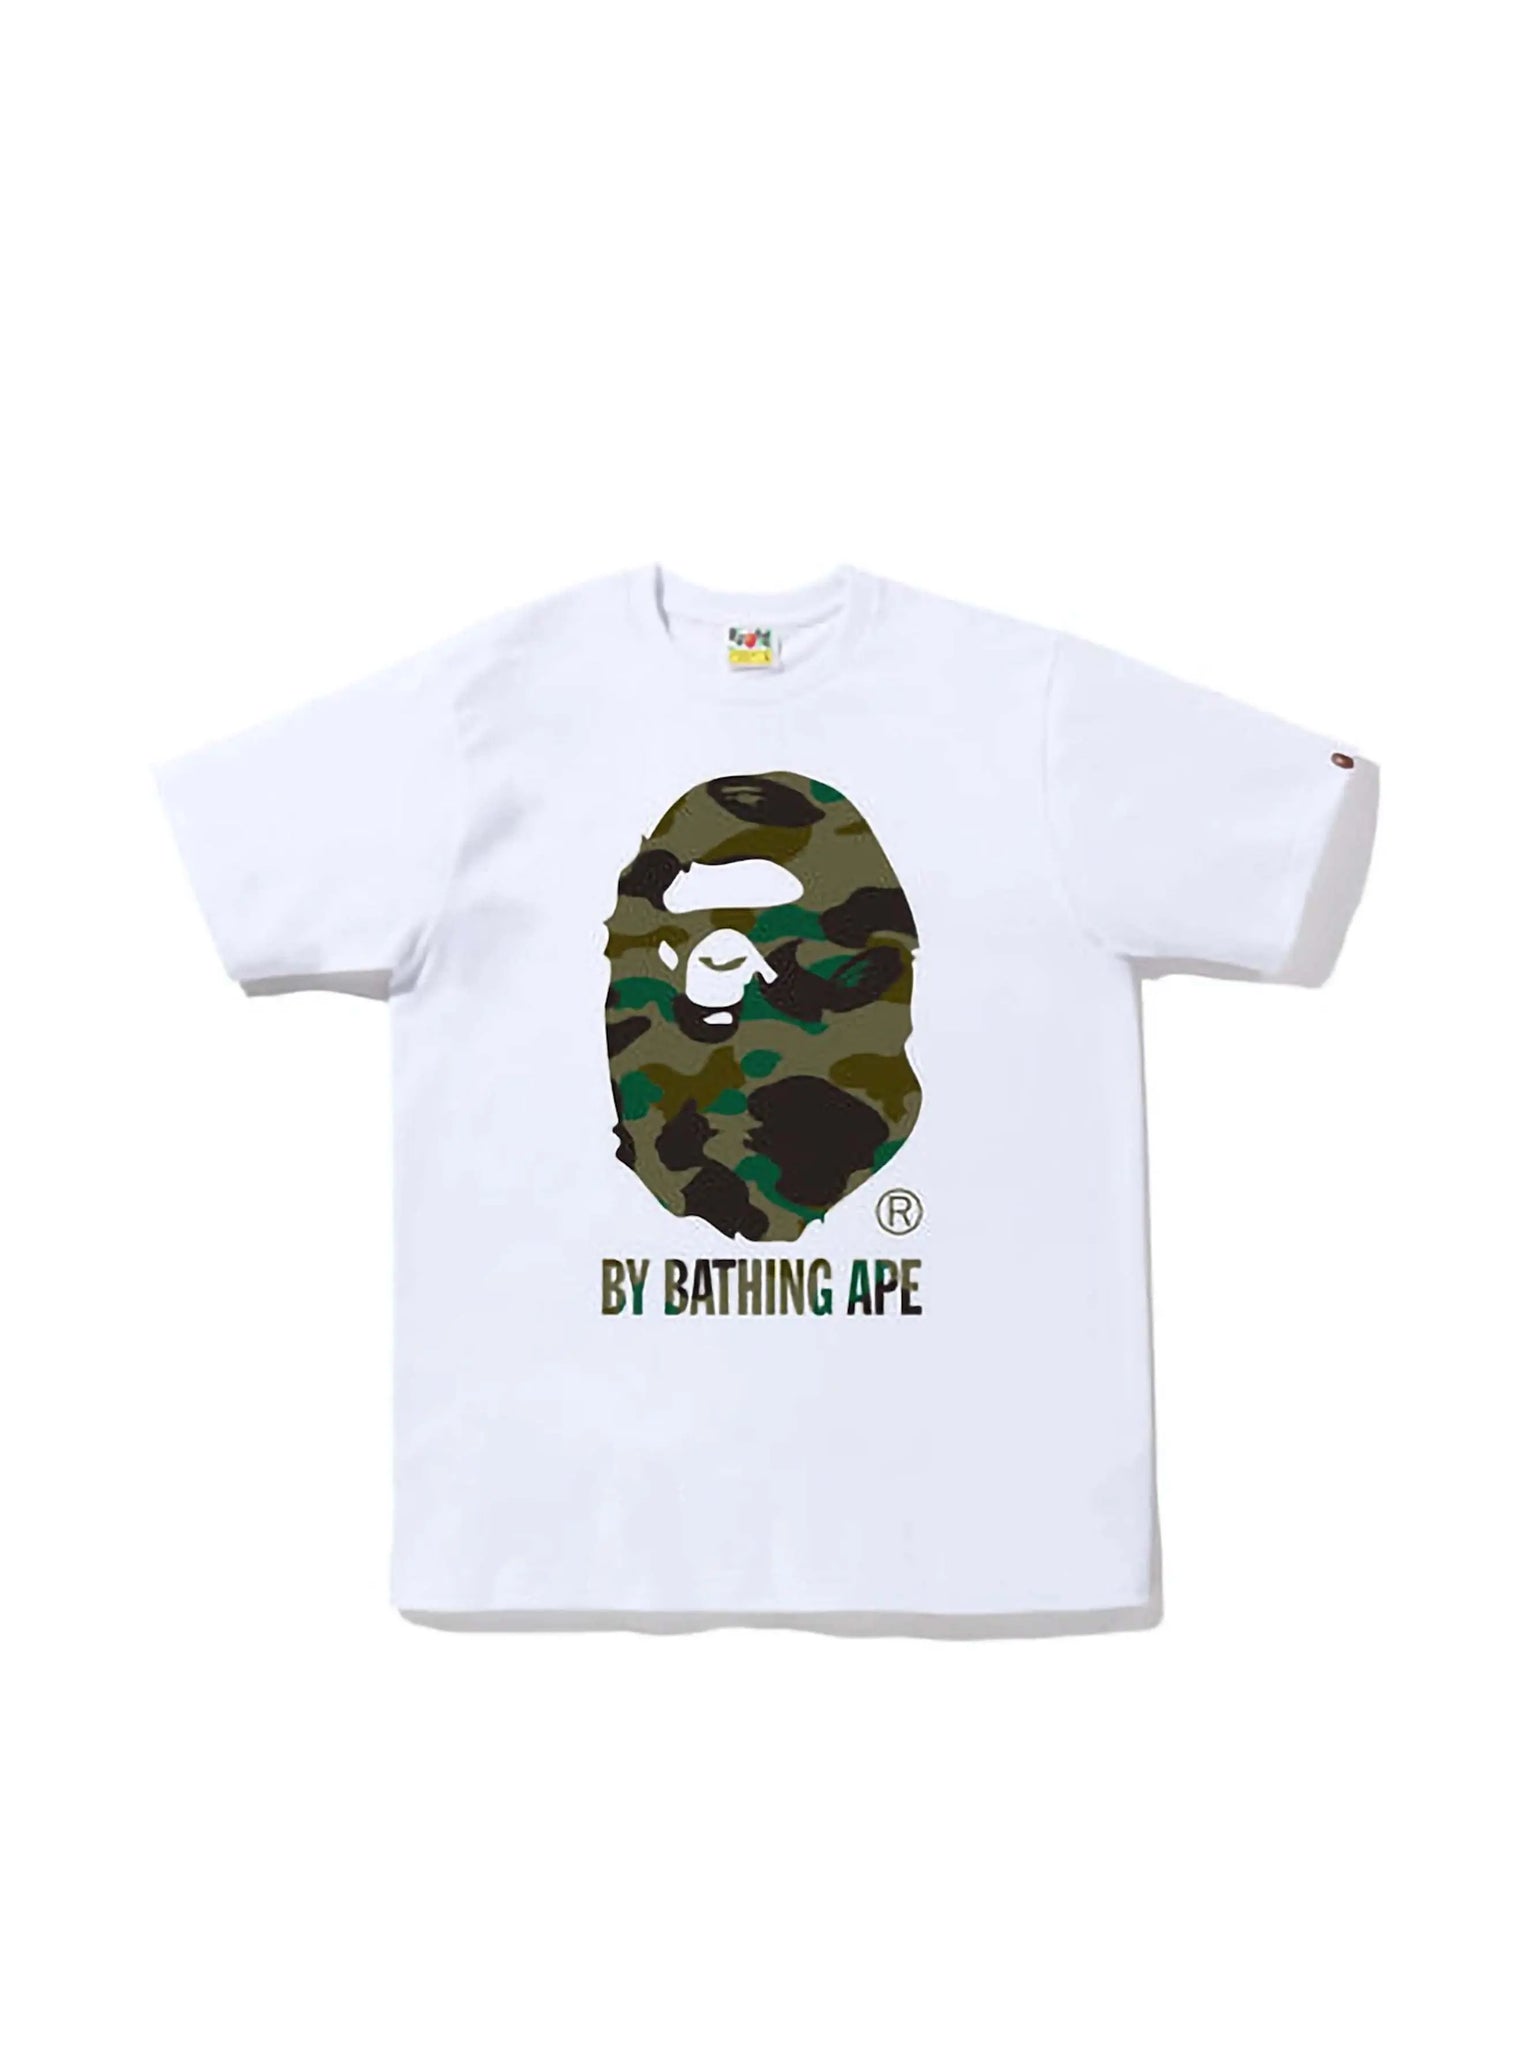 A Bathing Ape 1st Camo By Bathing Ape Tee White/Green in Auckland, New Zealand - Shop name